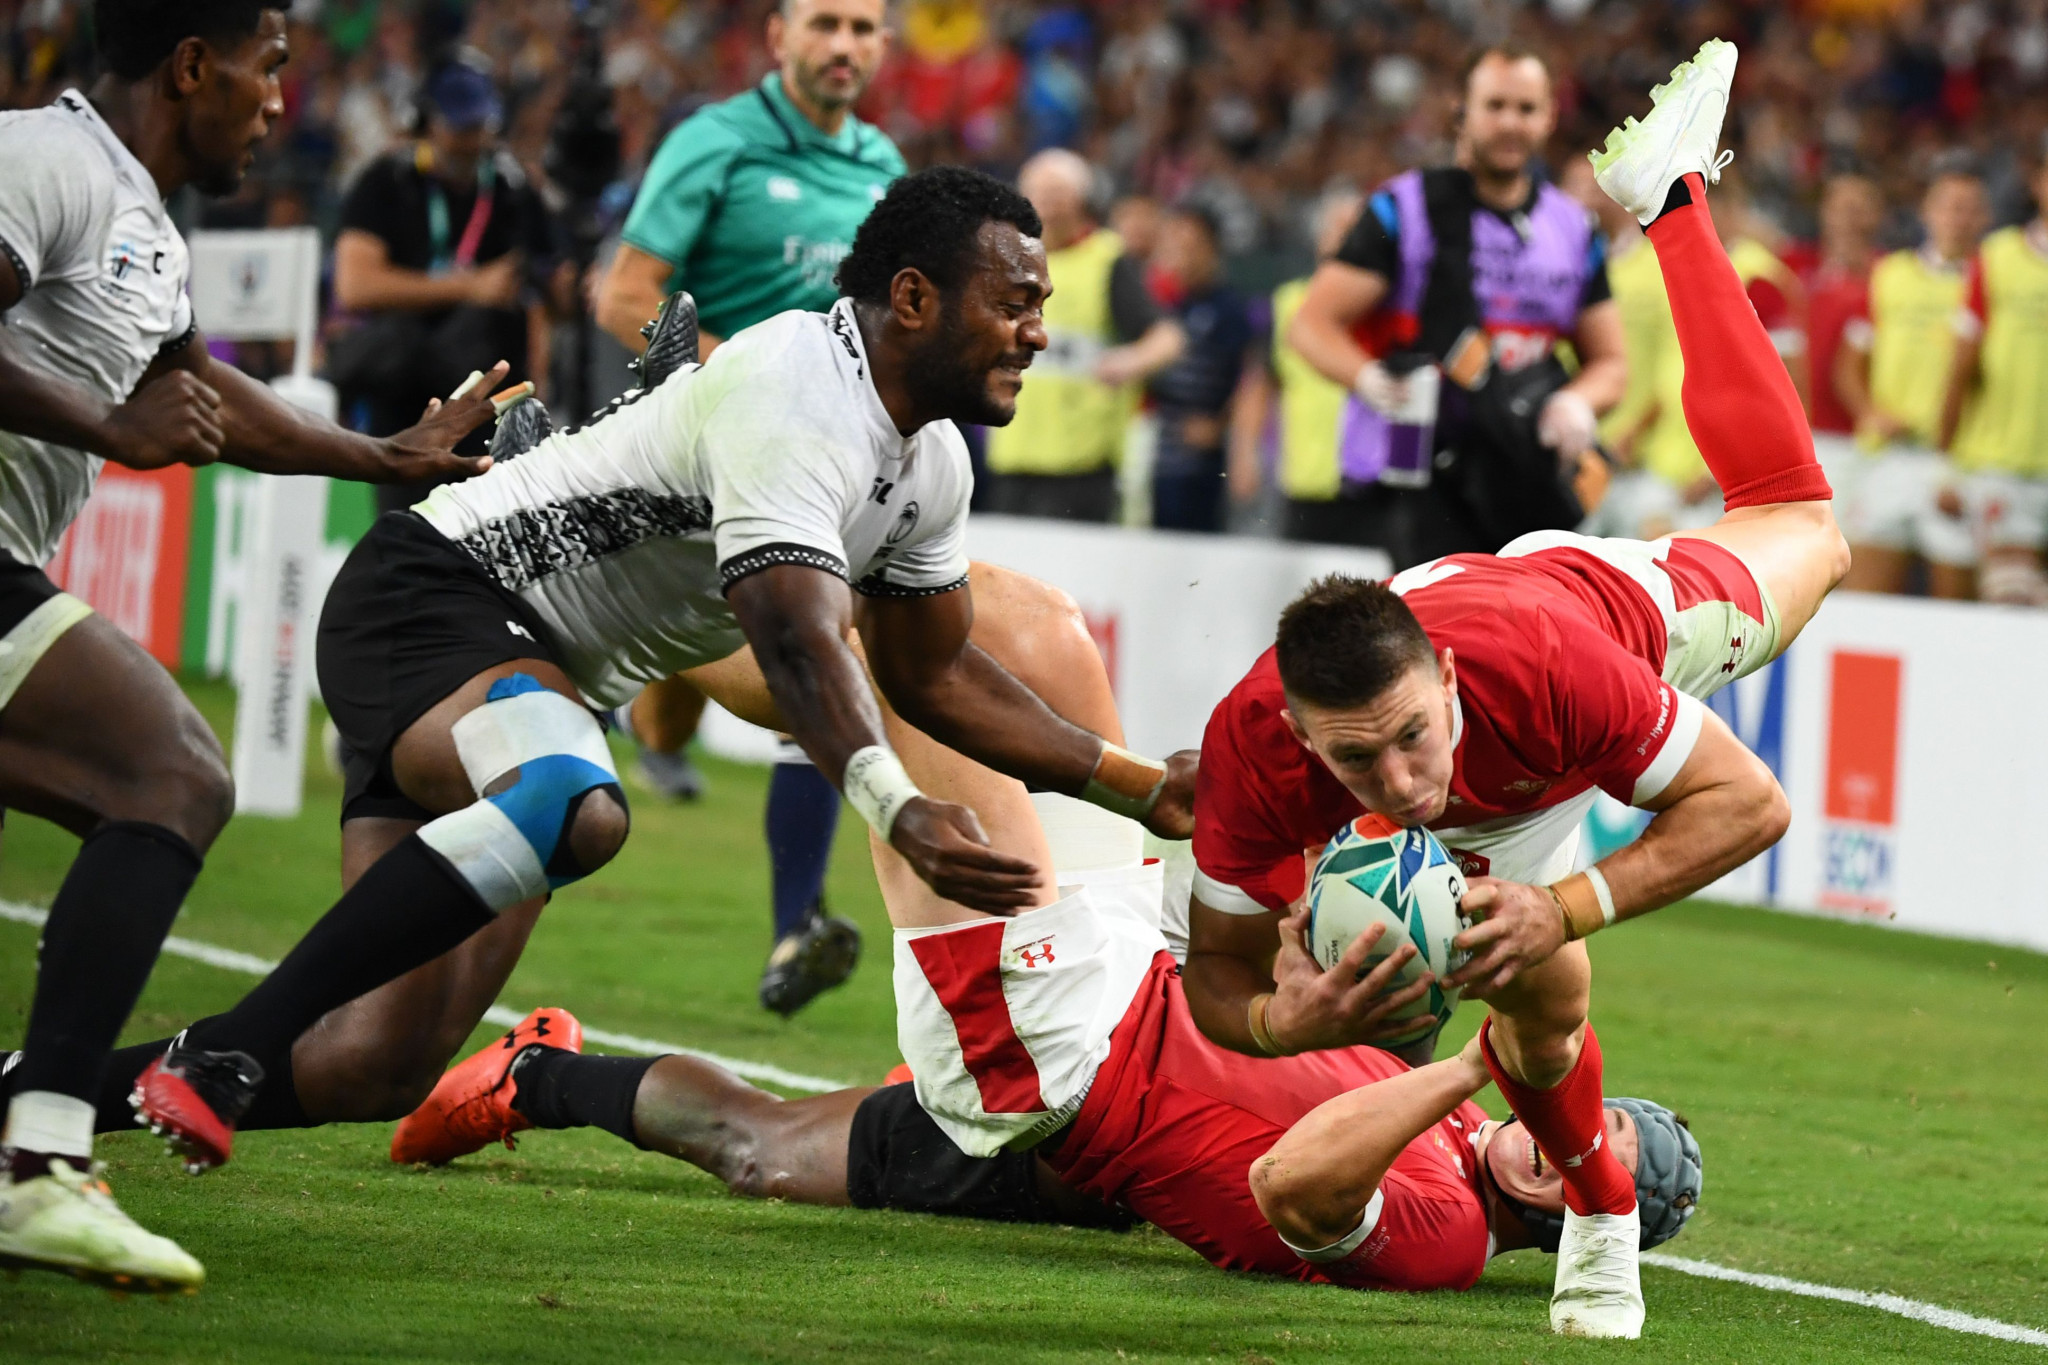 Fiji fall short against Wales in Rugby World Cup thriller